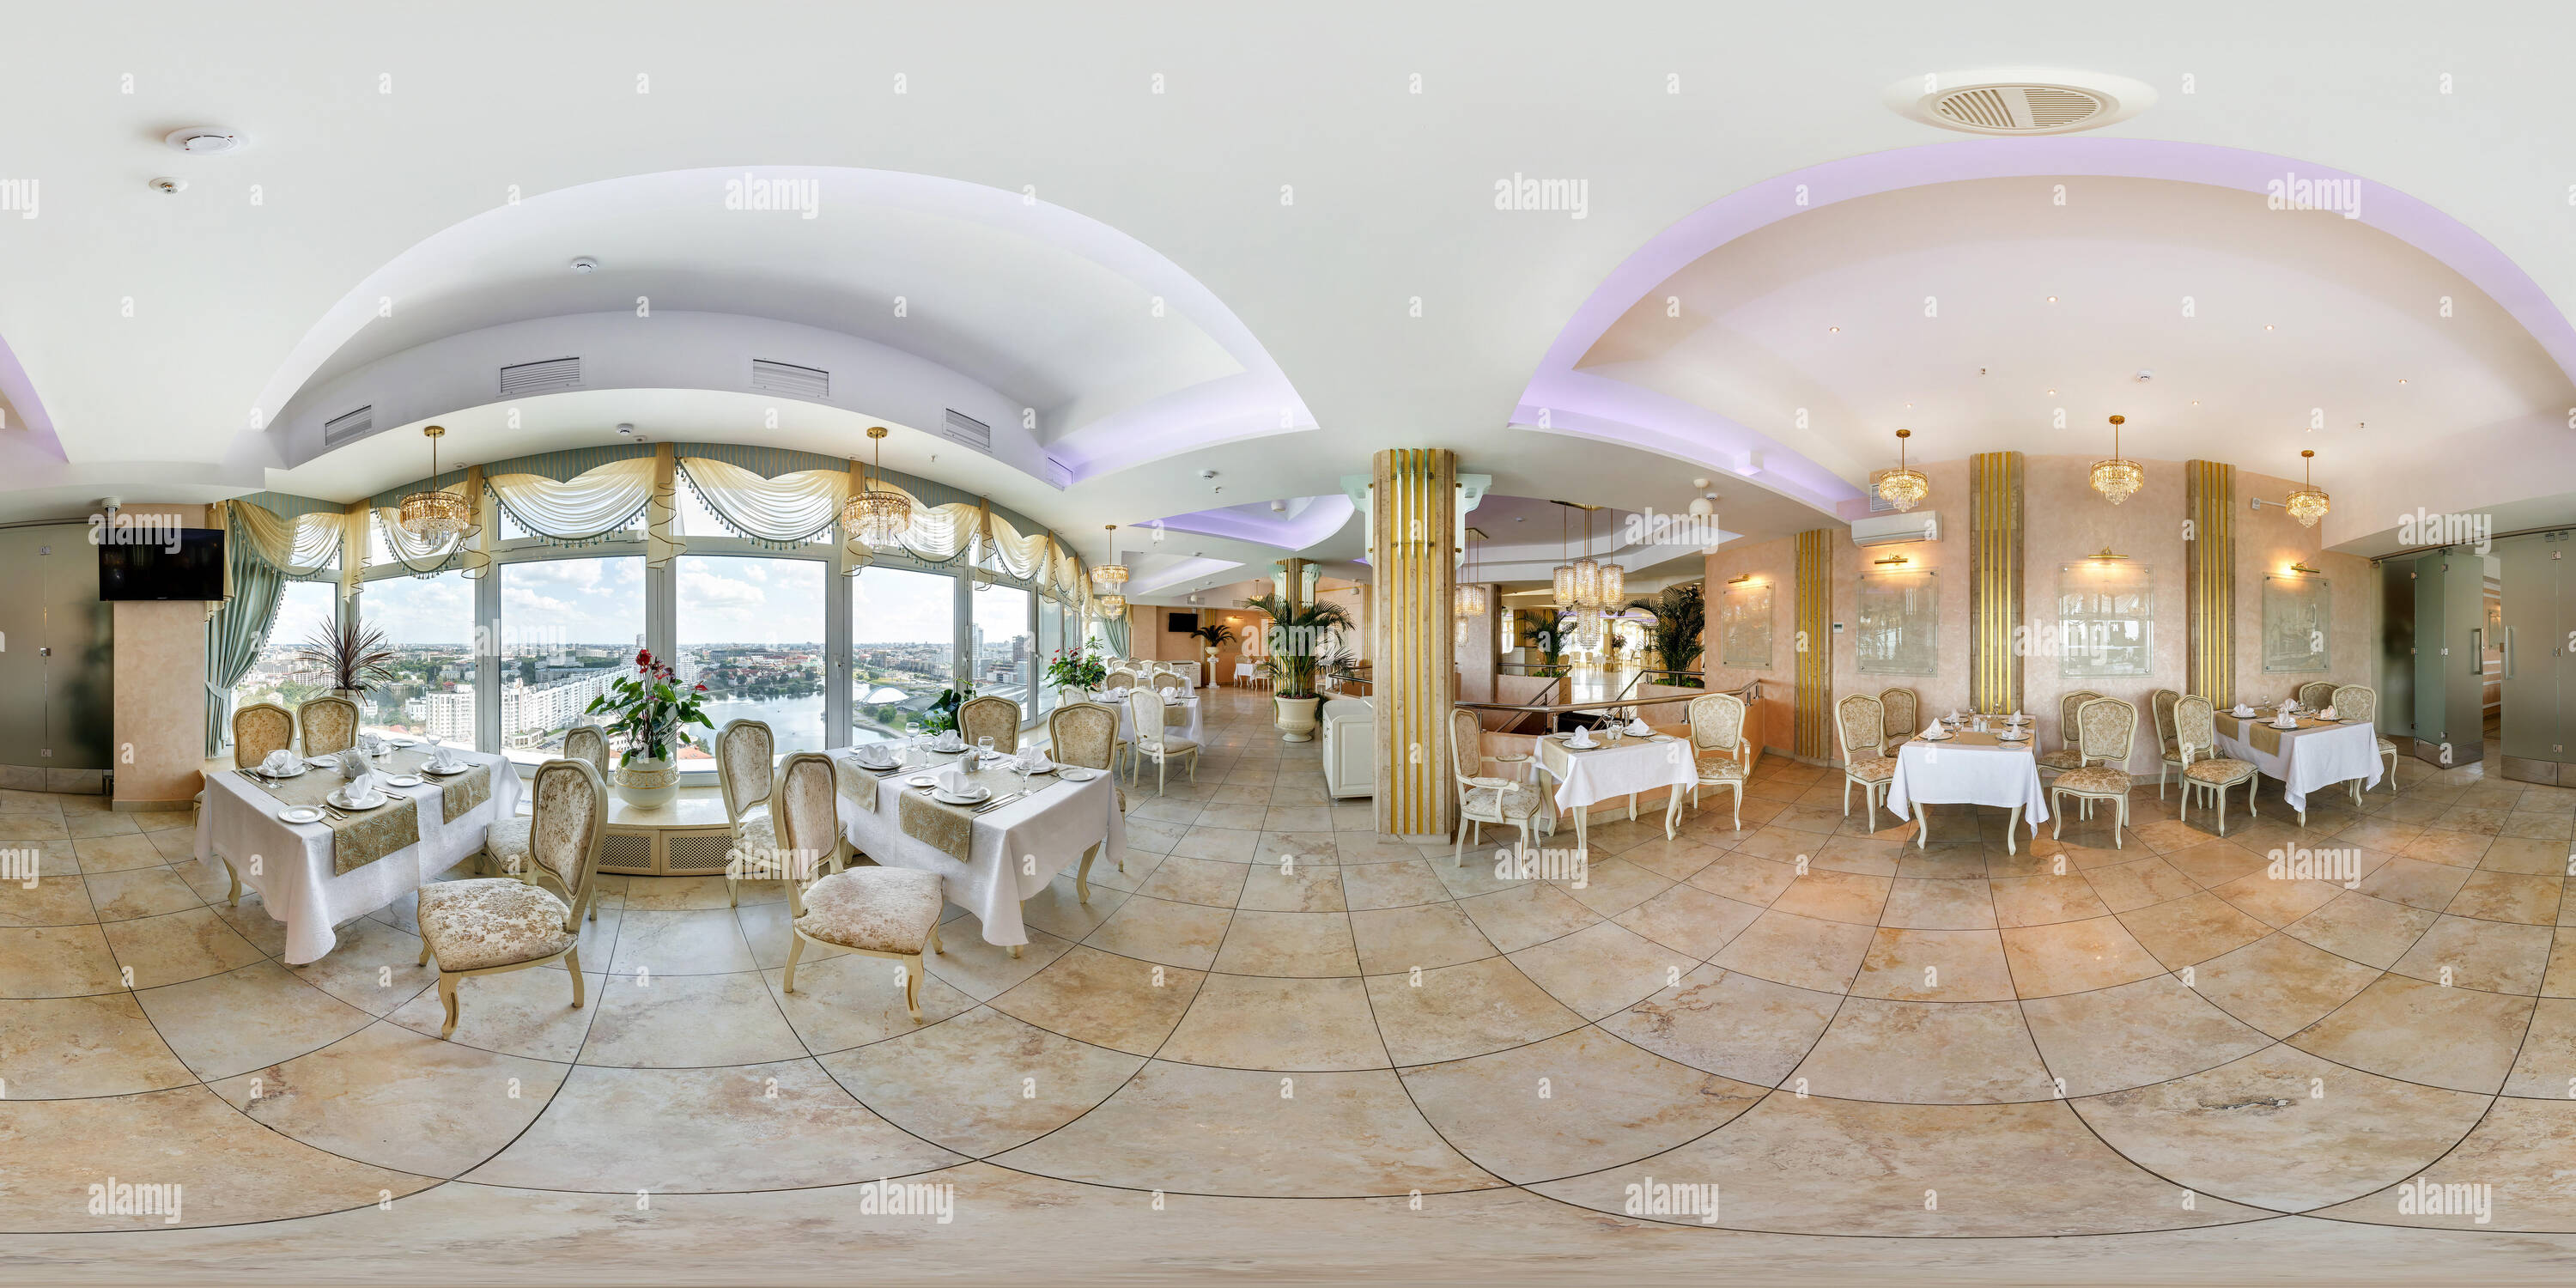 360 degree panoramic view of MINSK, BELARUS - JULY 15, 2014: Full 360 degree panorama in equirectangular spherical projection in stylish cafe complex Belarus in minimalist style.